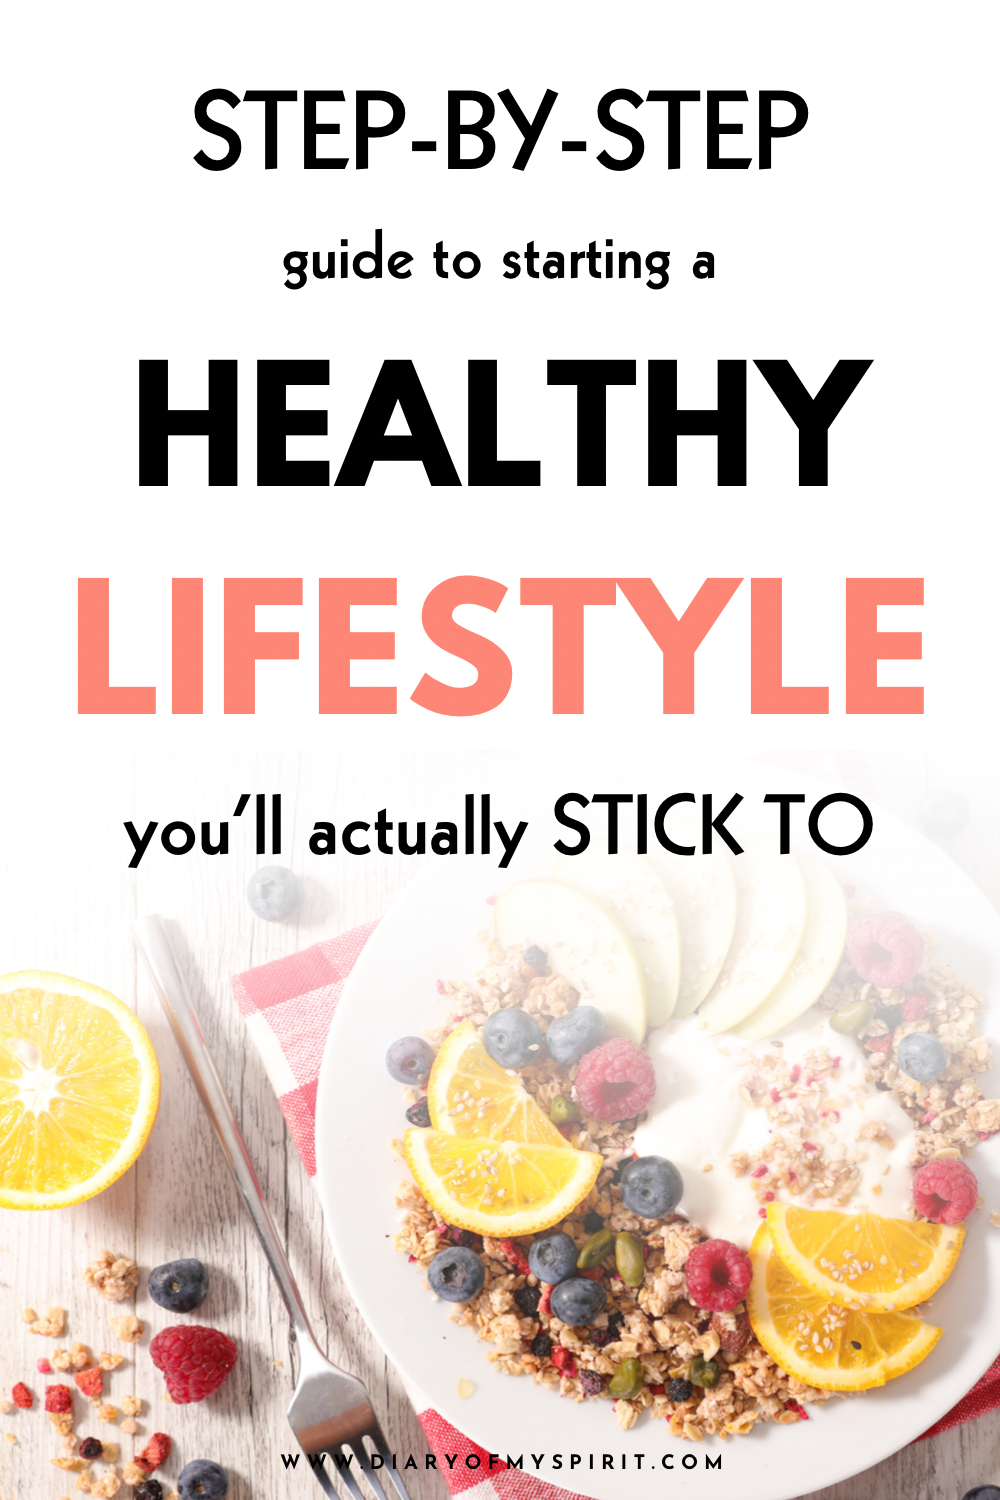 how to start a healthy lifestyle. how to be healthier. healthier lifestyle tips and ideas. healthy living ideas. daily habits for living a better life.